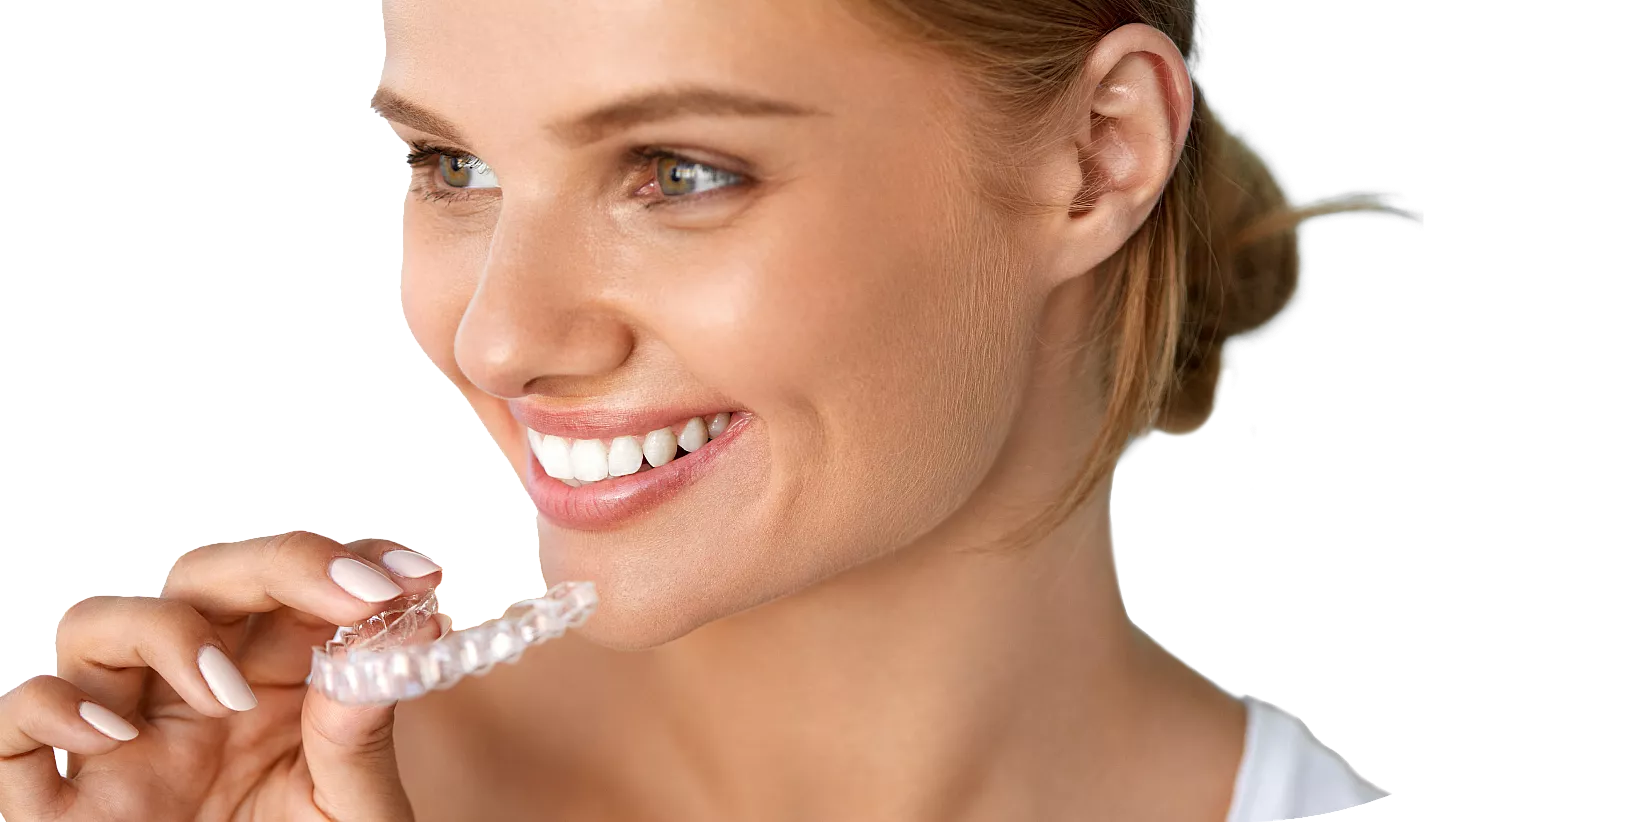 Orthodontic services in Victoria